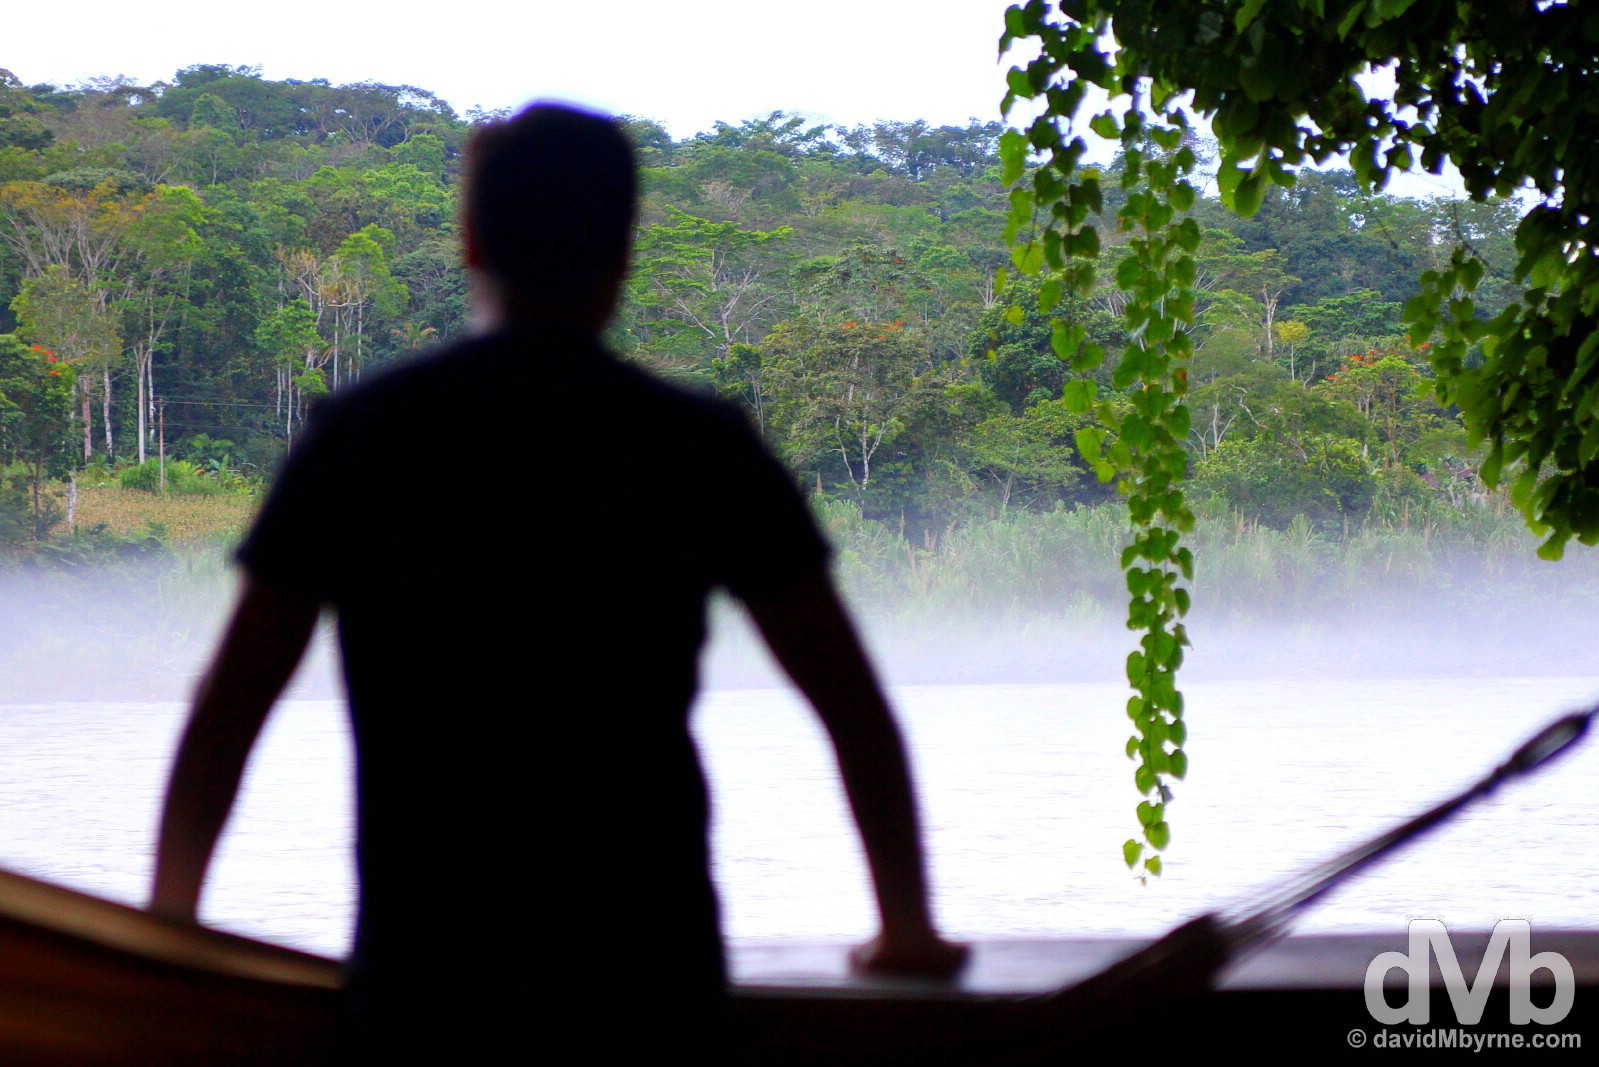 Admiring the rain forest & Napo River view from lodge 13 of the Cotococha Amazon Lodge, Ecuador. July 12, 2015.